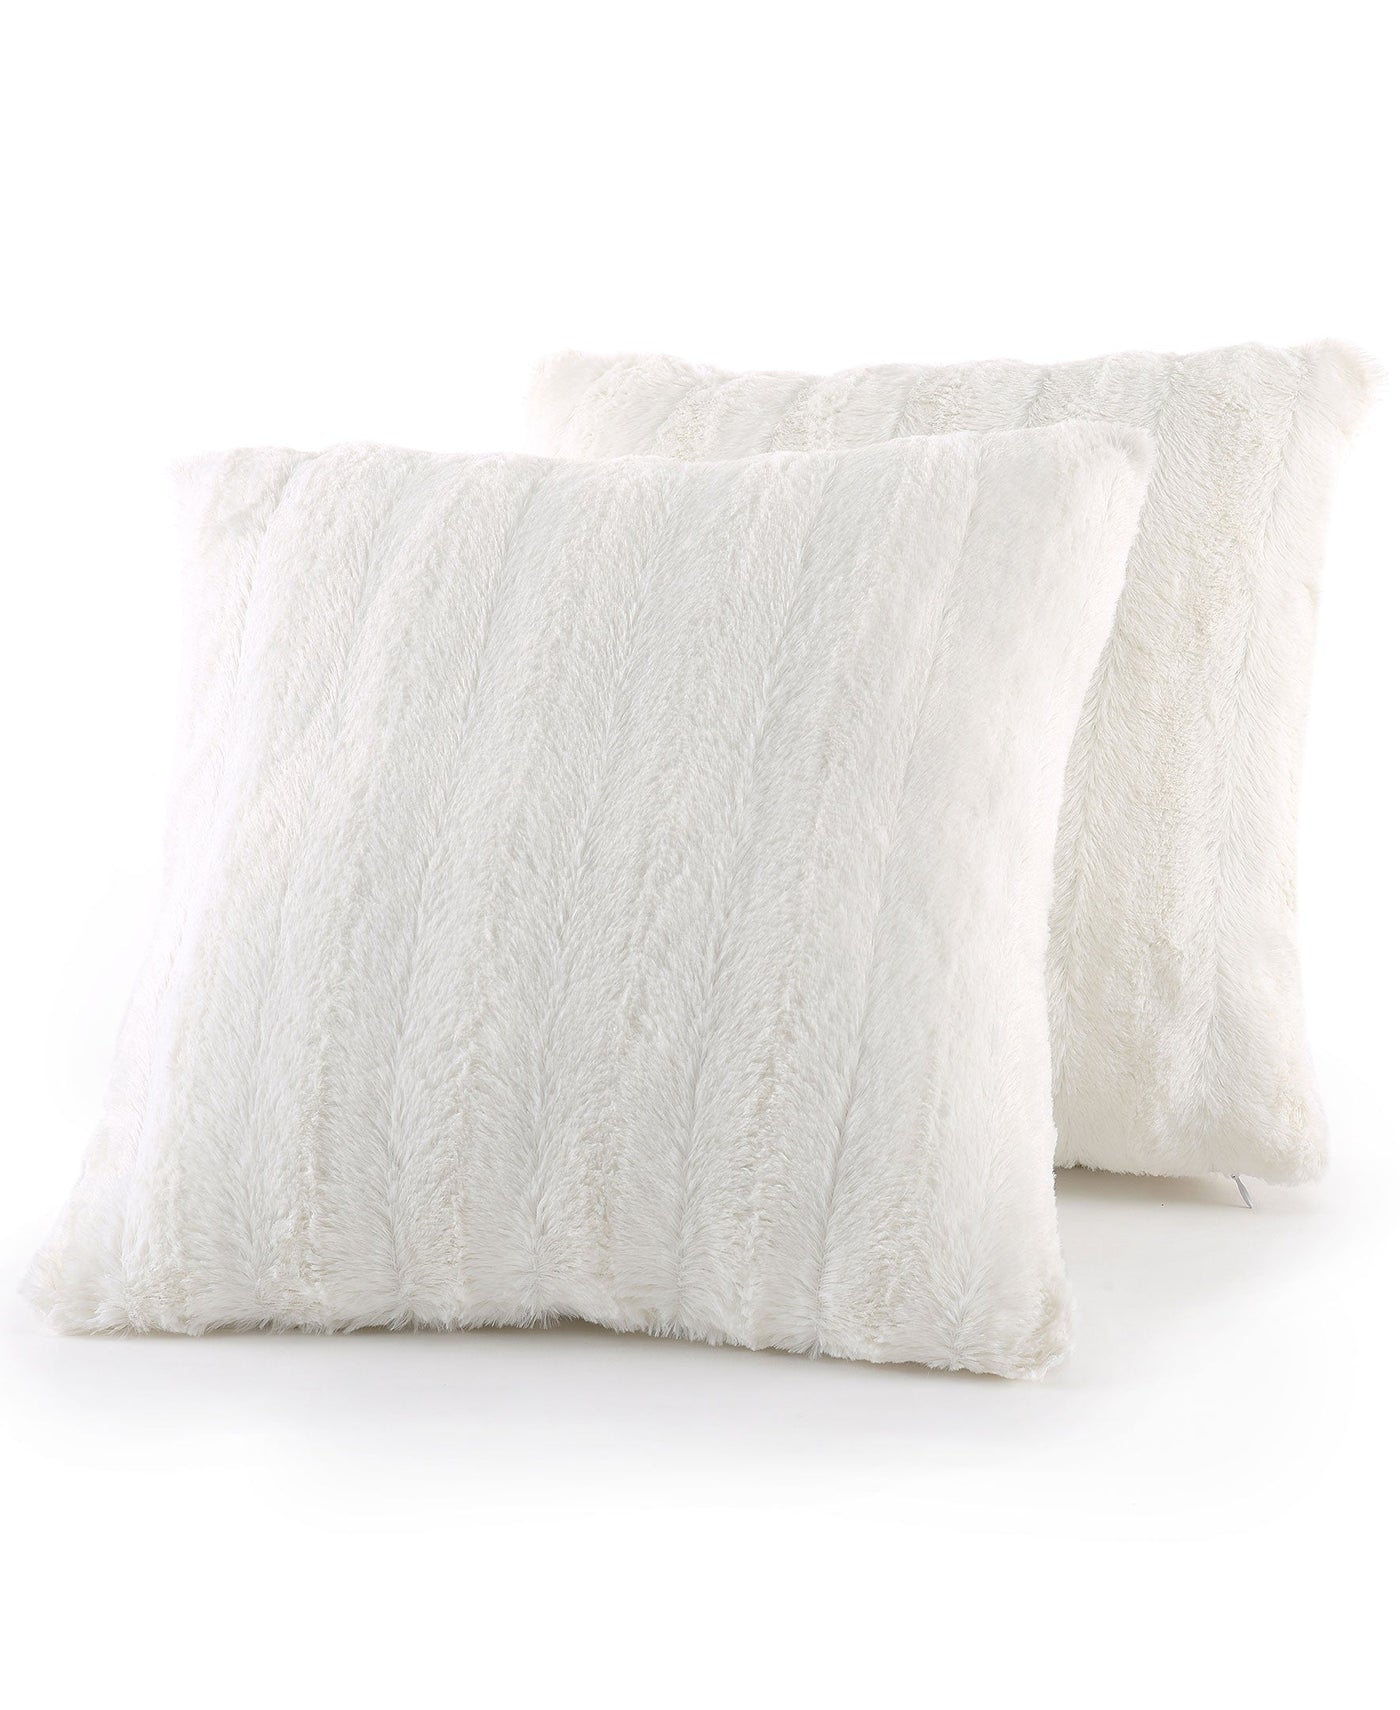 Cheer Collection Faux Fur Pillows - Decorative Throw Pillows for Couch &  Bed - Machine Washable - 20 x 20 - Grey (Set of 2)